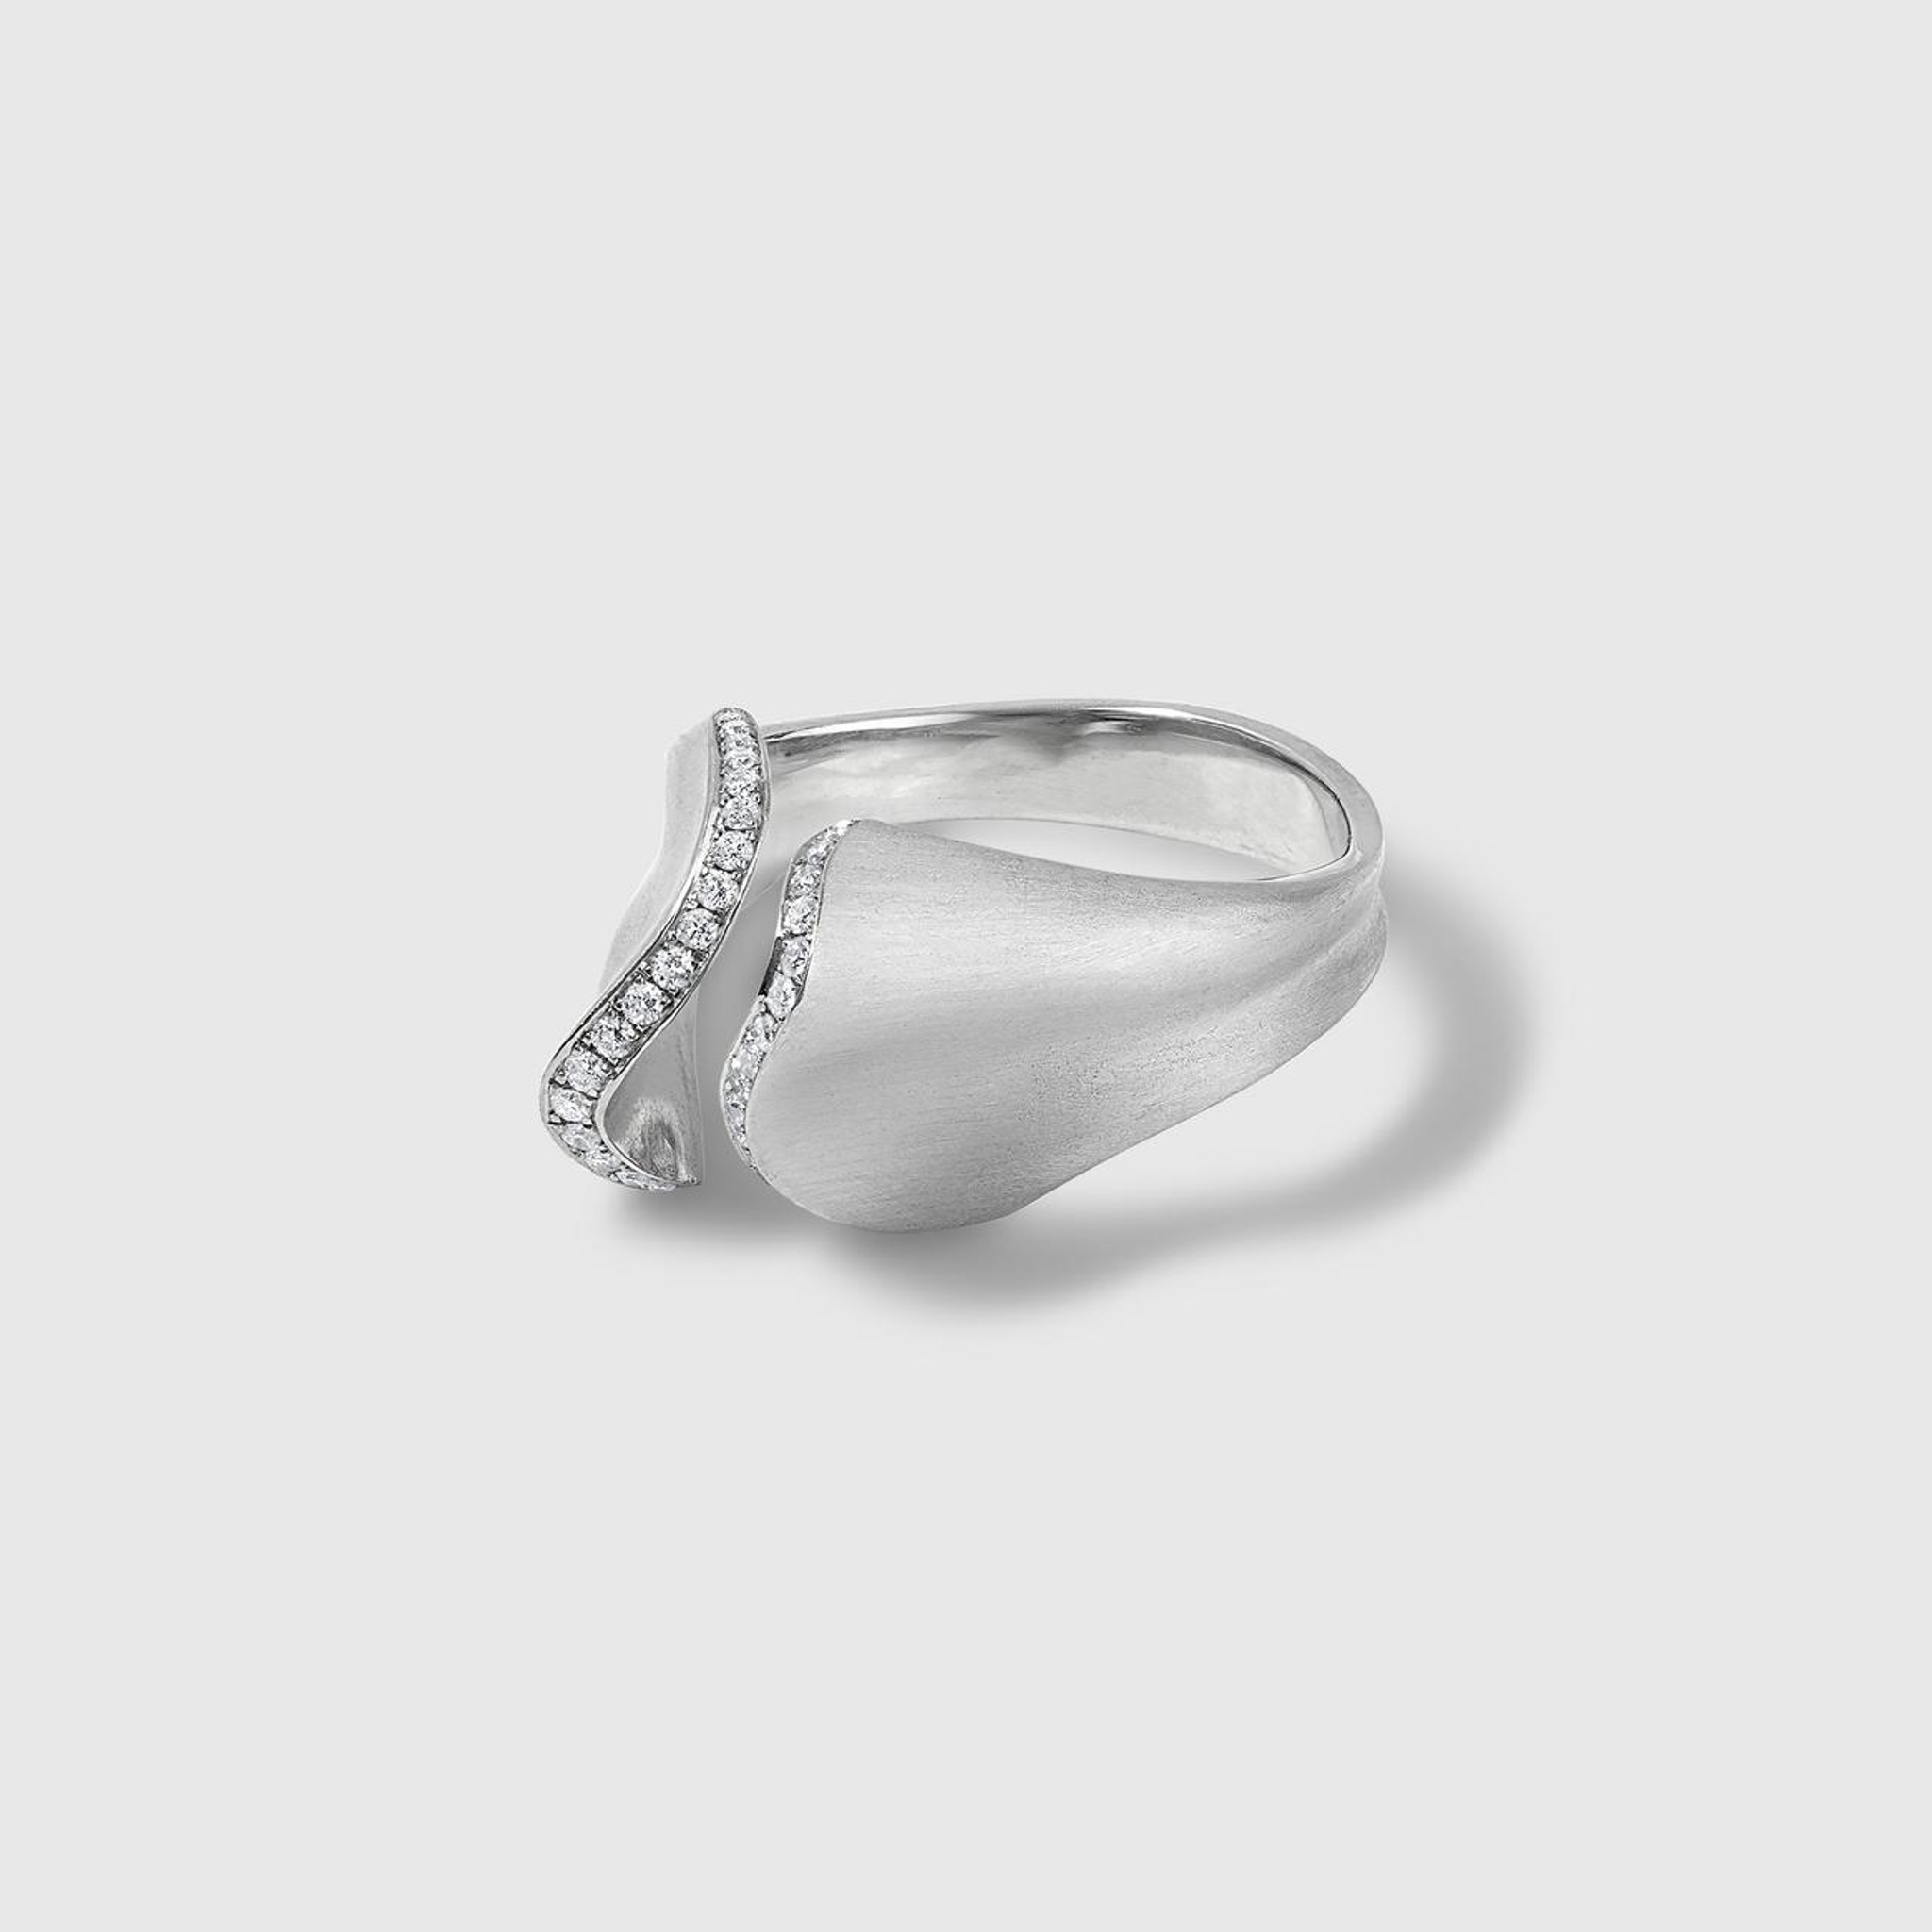 Couture, "Influence" Platinum and Diamond Sculptural ring by Ashley Childs The INFLUENCE ring from the Theory Collection by ASHLEY CHILDS; matt-finish, platinum and 0.15ct diamonds (SI/VS); sculptural, feminine, delicate, made to order, prices based on ring, size 7